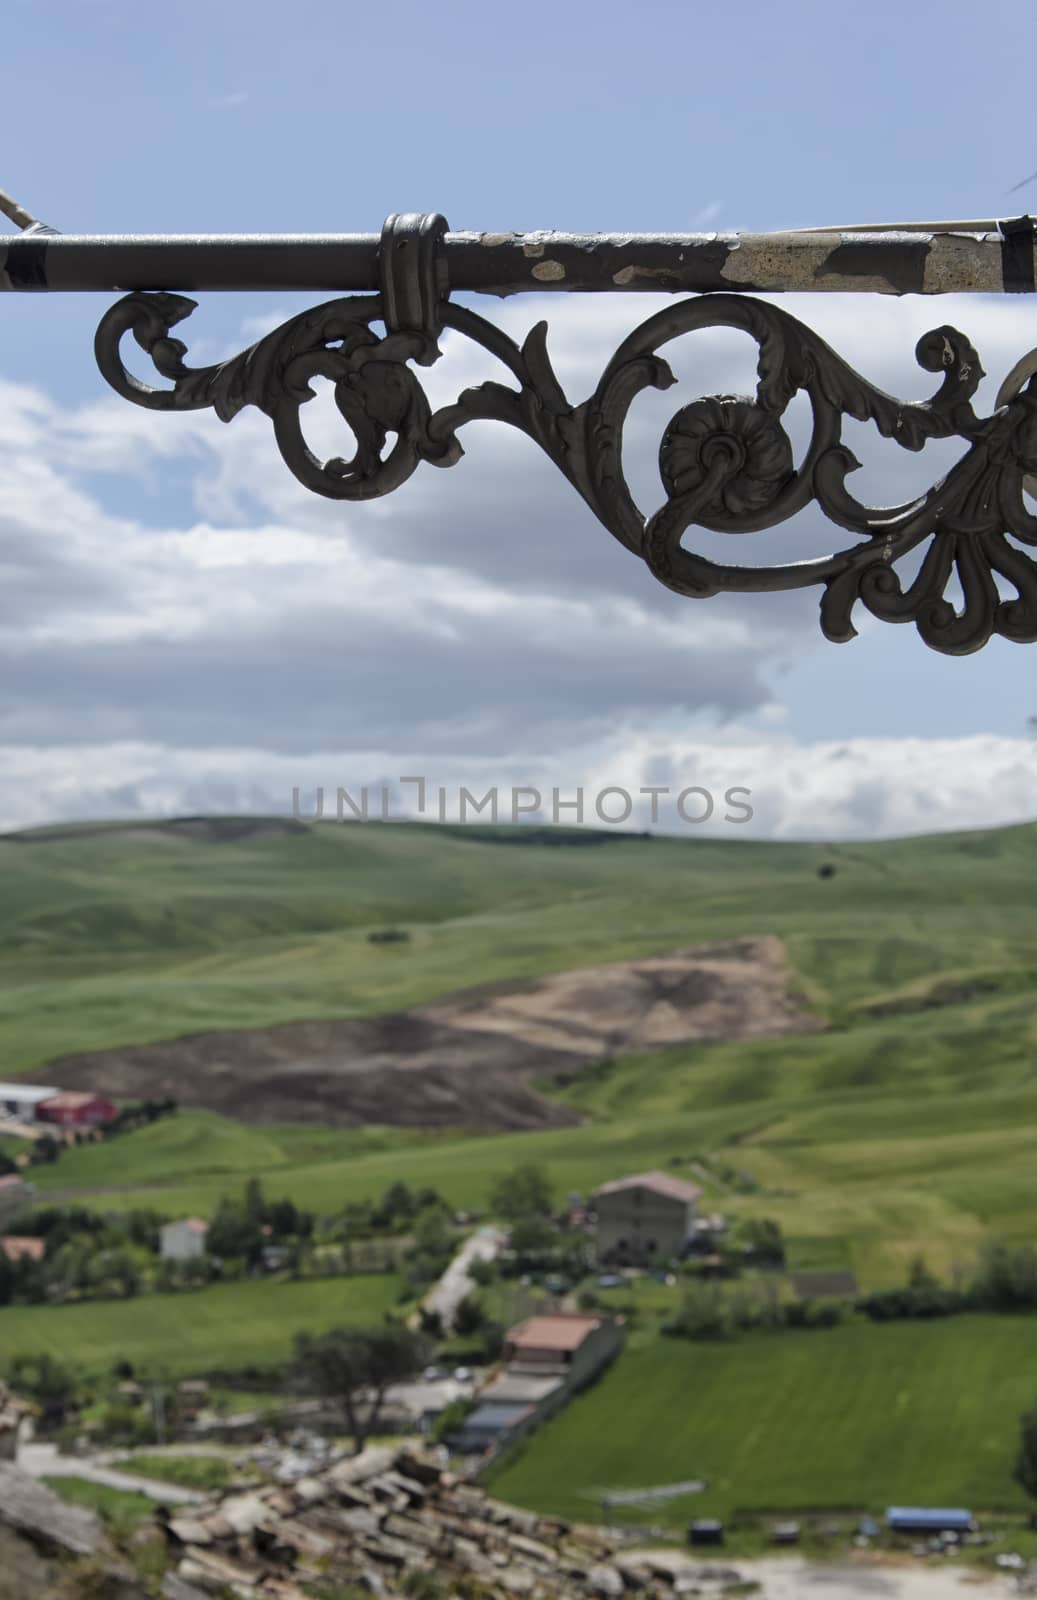 Wrought iron lamp with landscape in the background